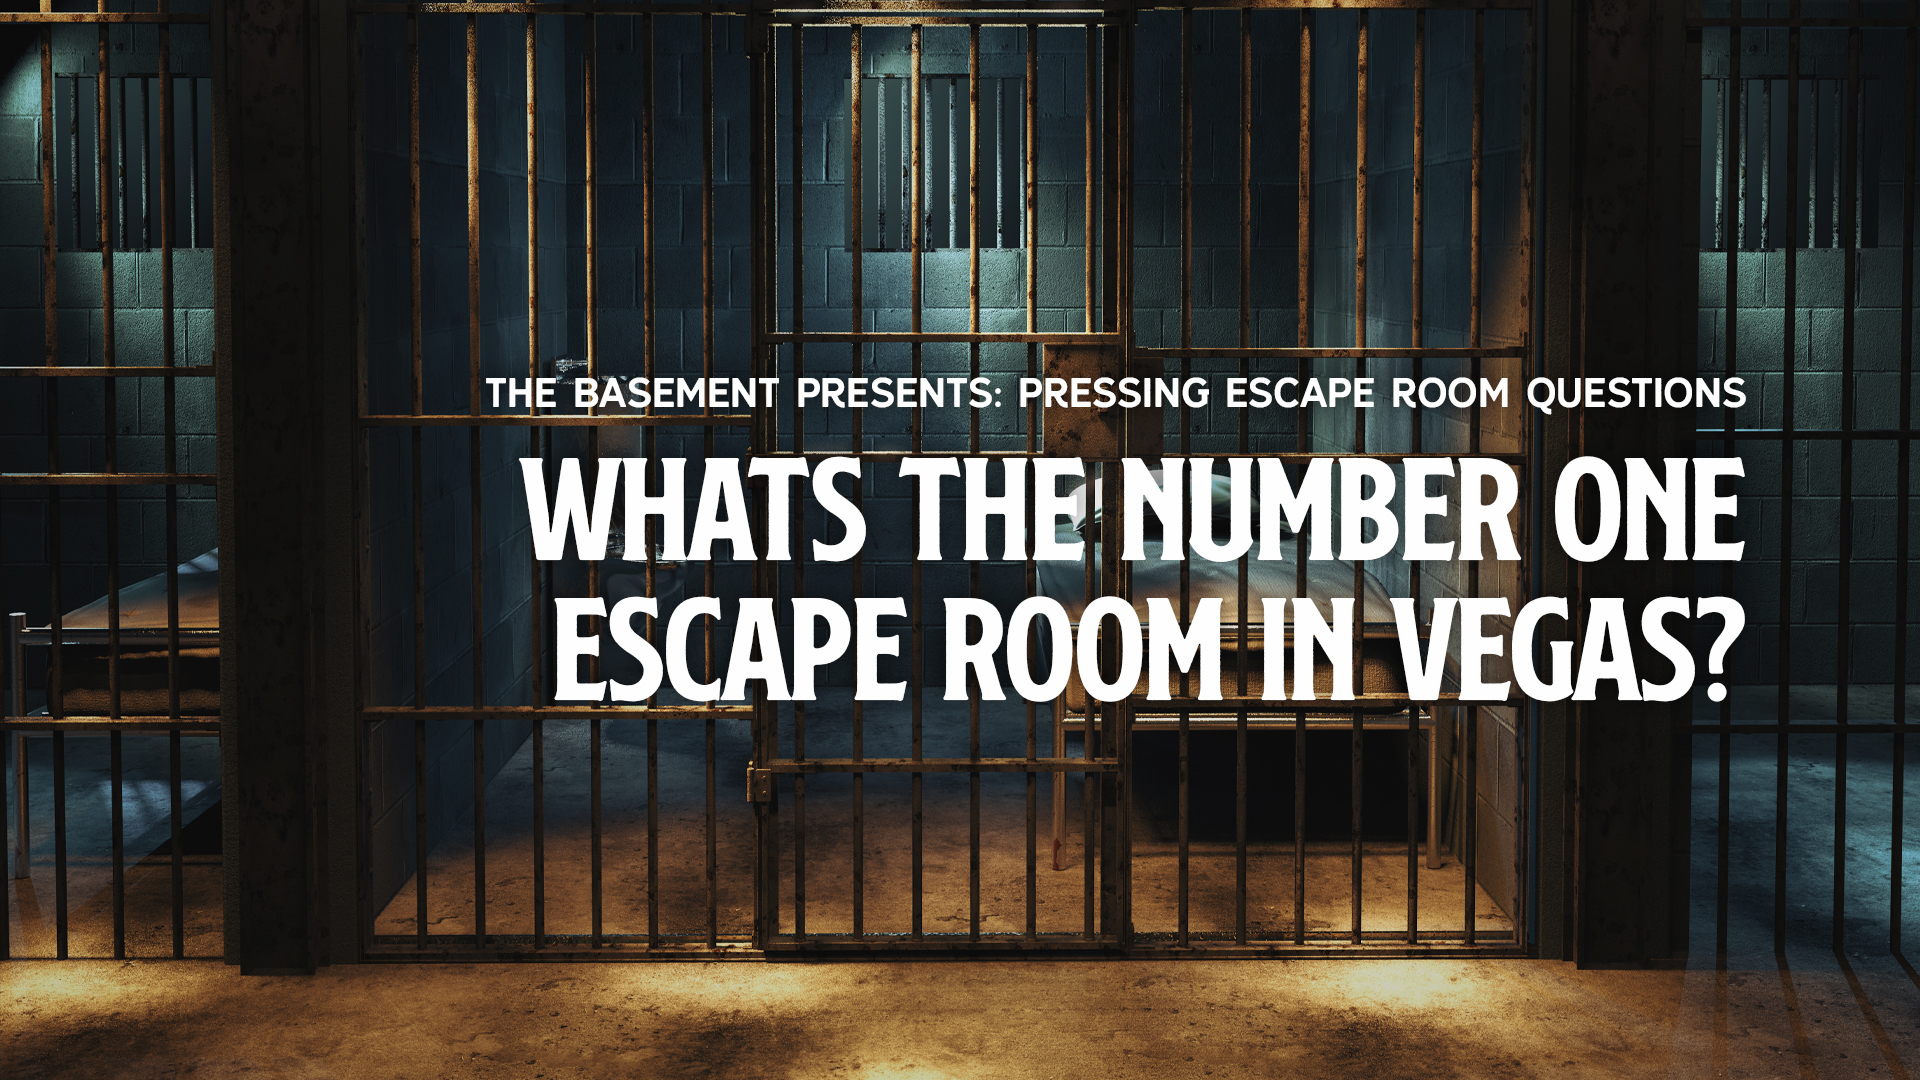 Number One Escape Room in Las Vegas